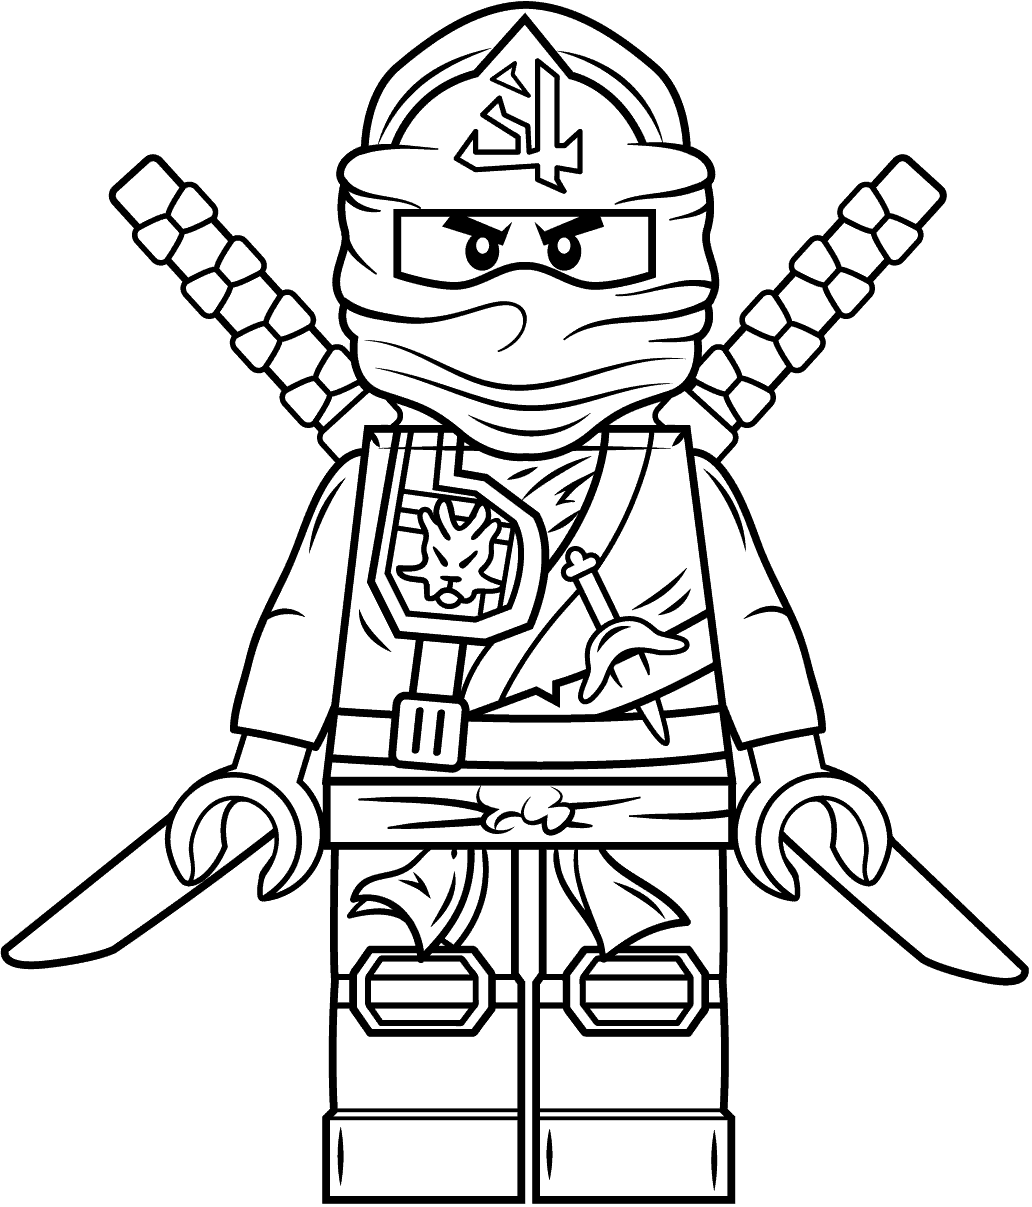 Lloyd Zukin Robe Coloring Pages - Coloring Cool